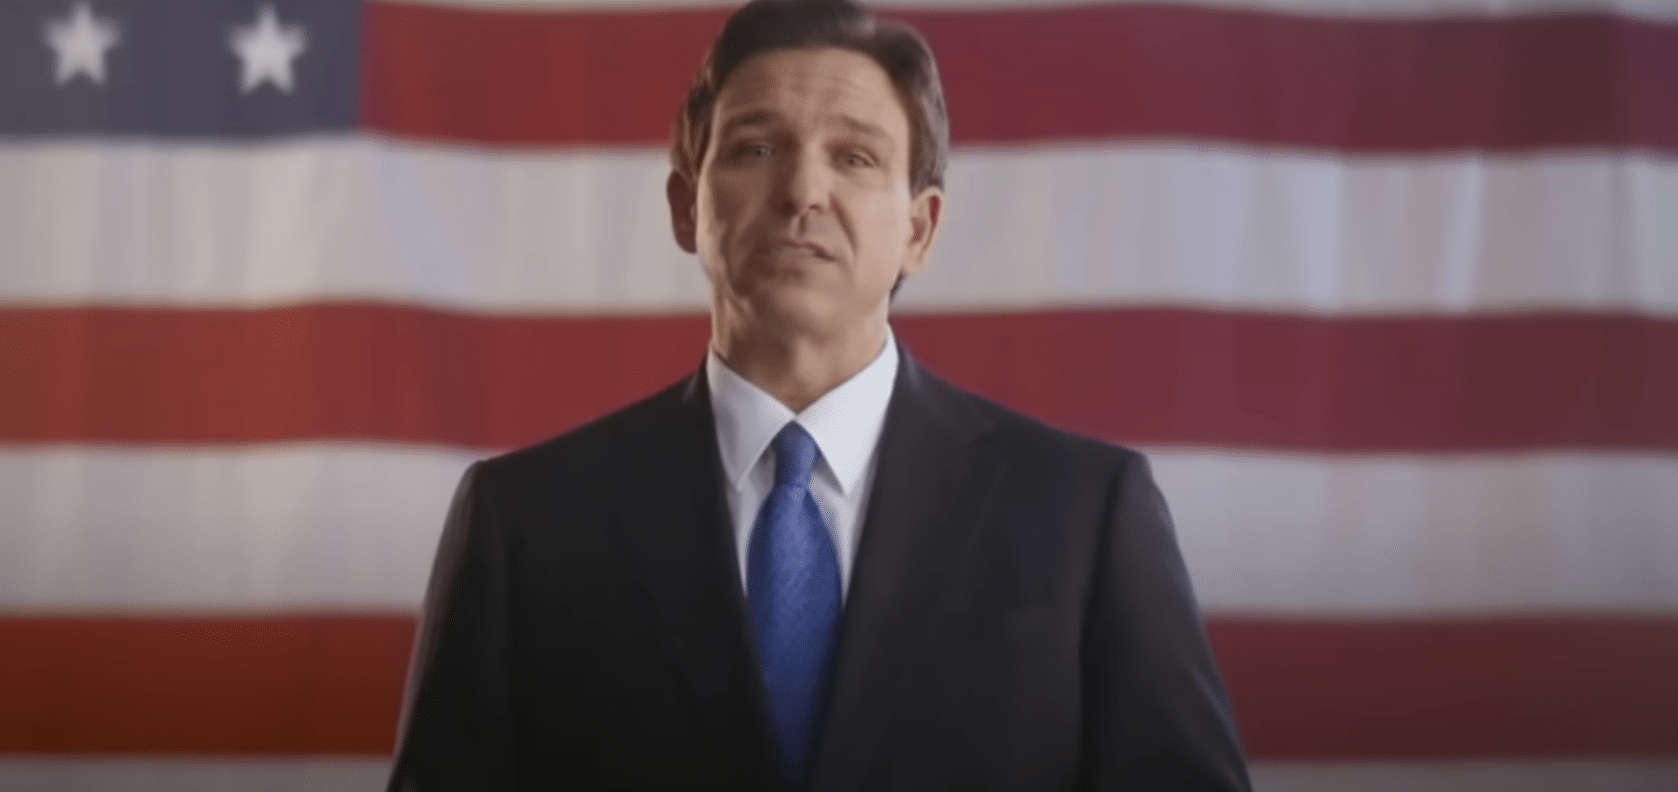 (WATCH) DeSantis launches presidential campaign with ‘Great American Comeback’ video